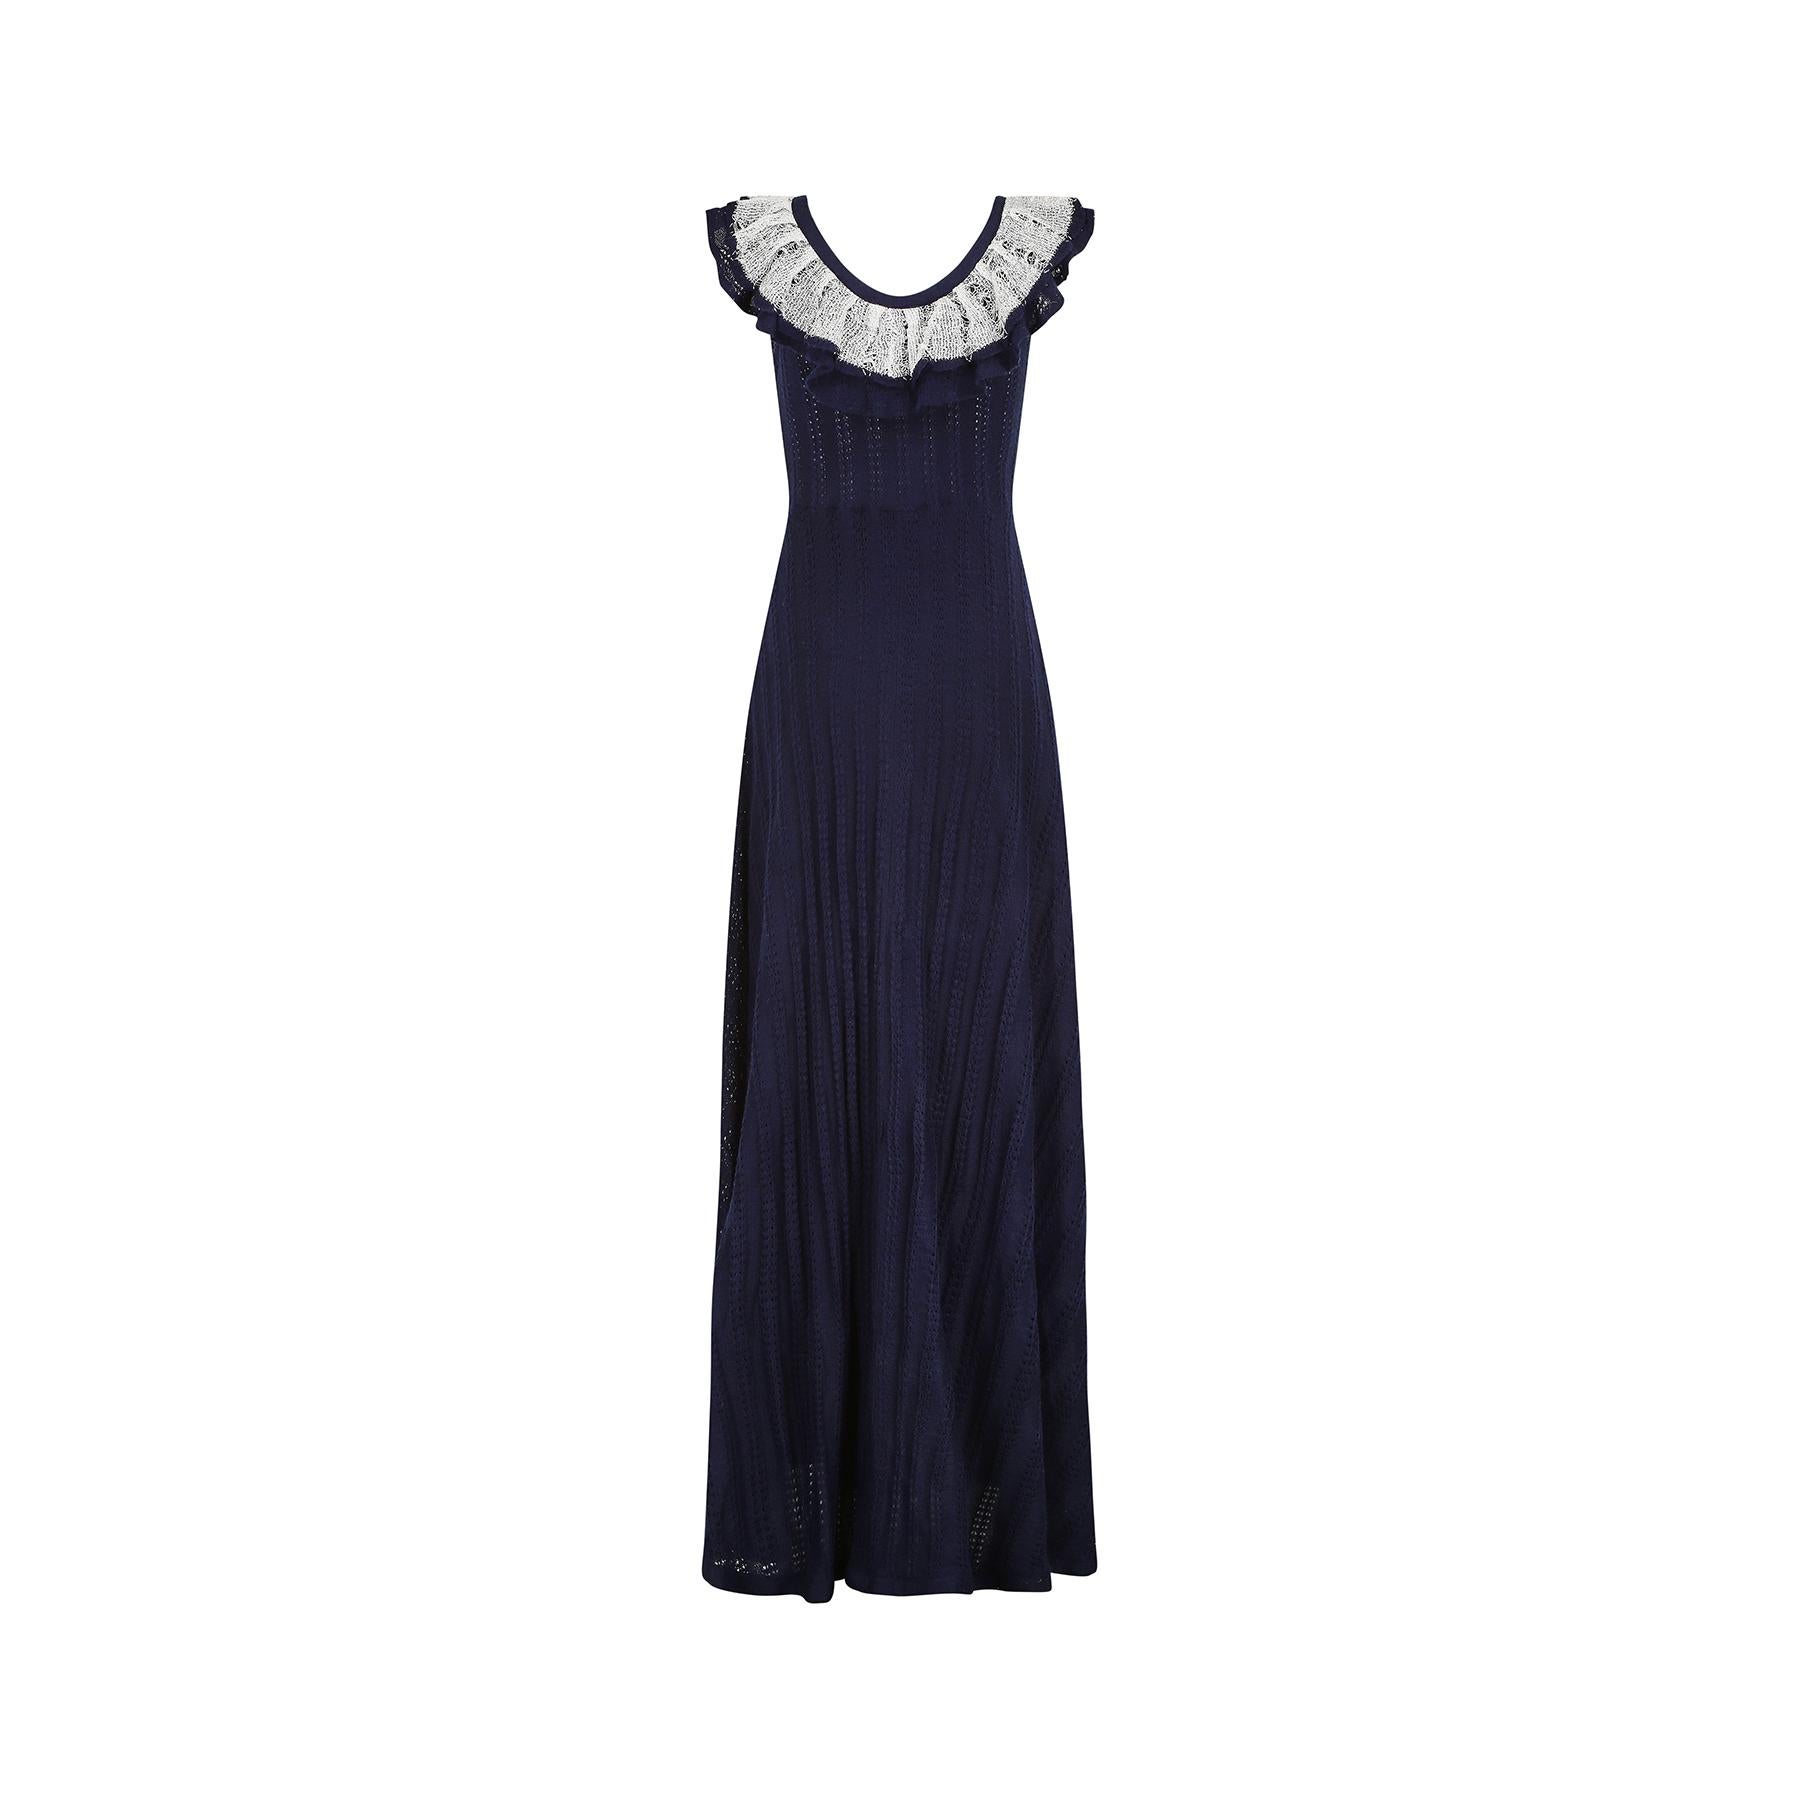 Black 1970s Doree Leventhal Navy and White Knitted Maxi Dress